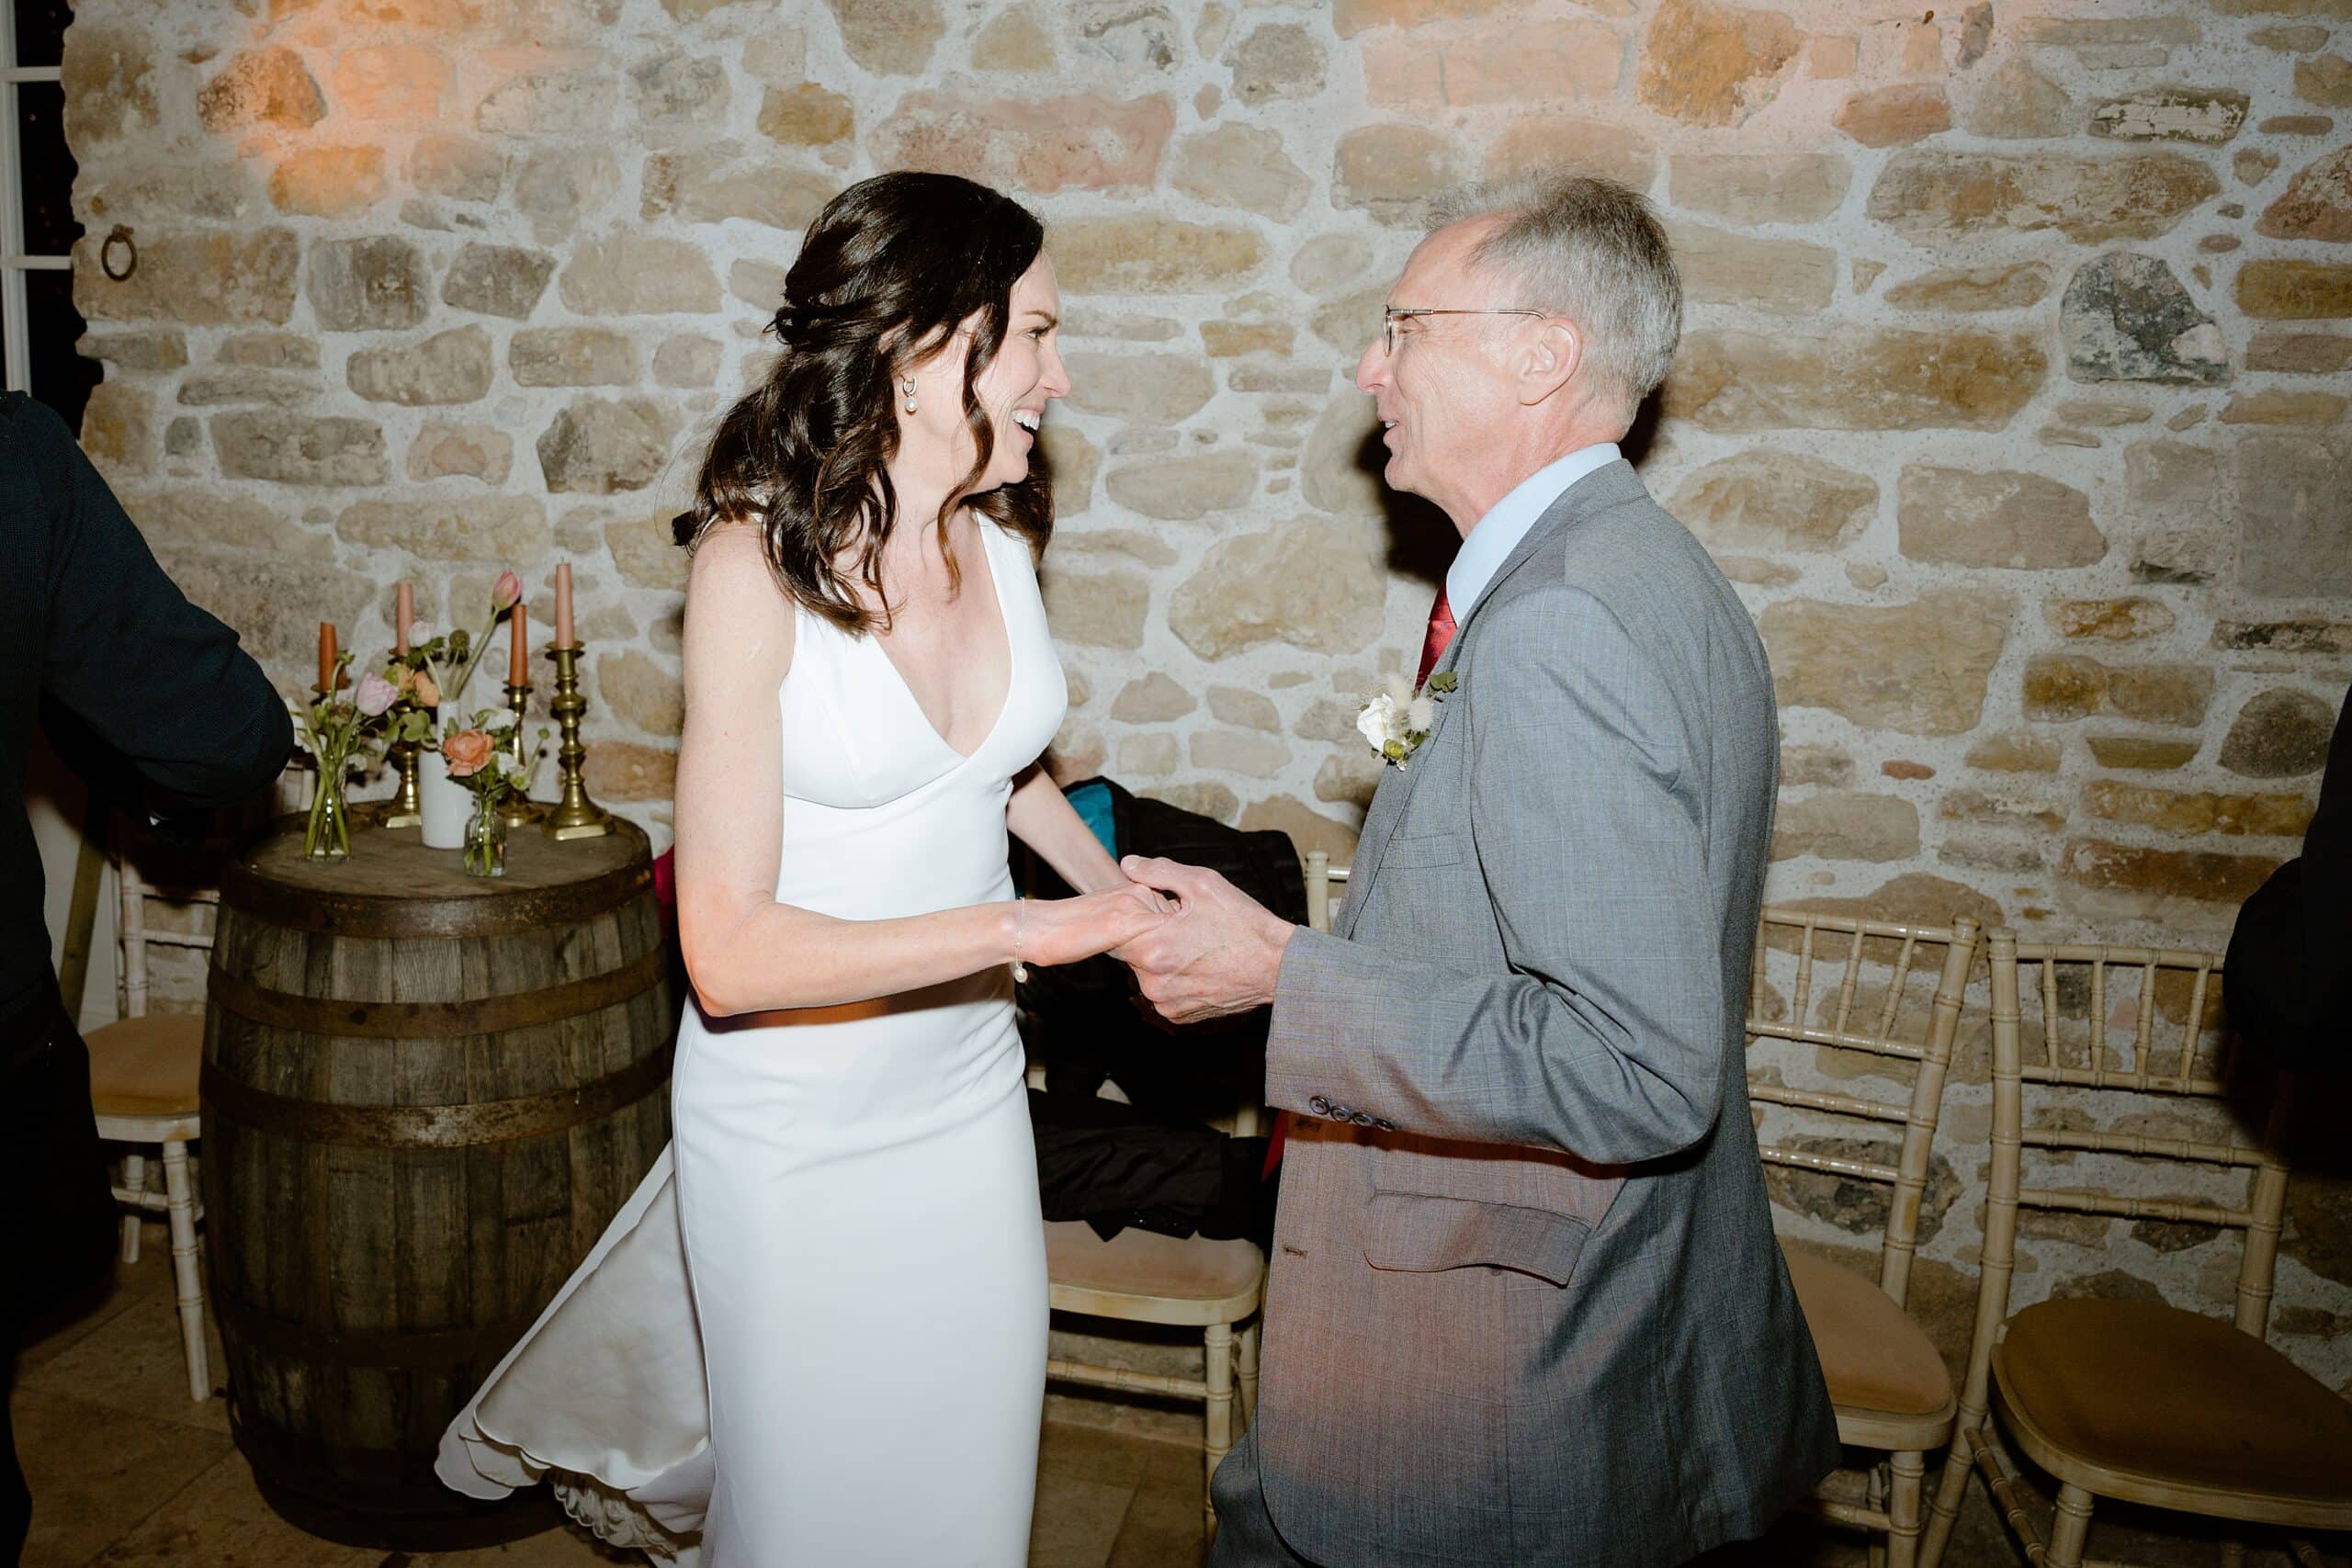 documentary shot of the bride smiling and holding hands with her father at a fun farm wedding venue near edinburgh in scotland